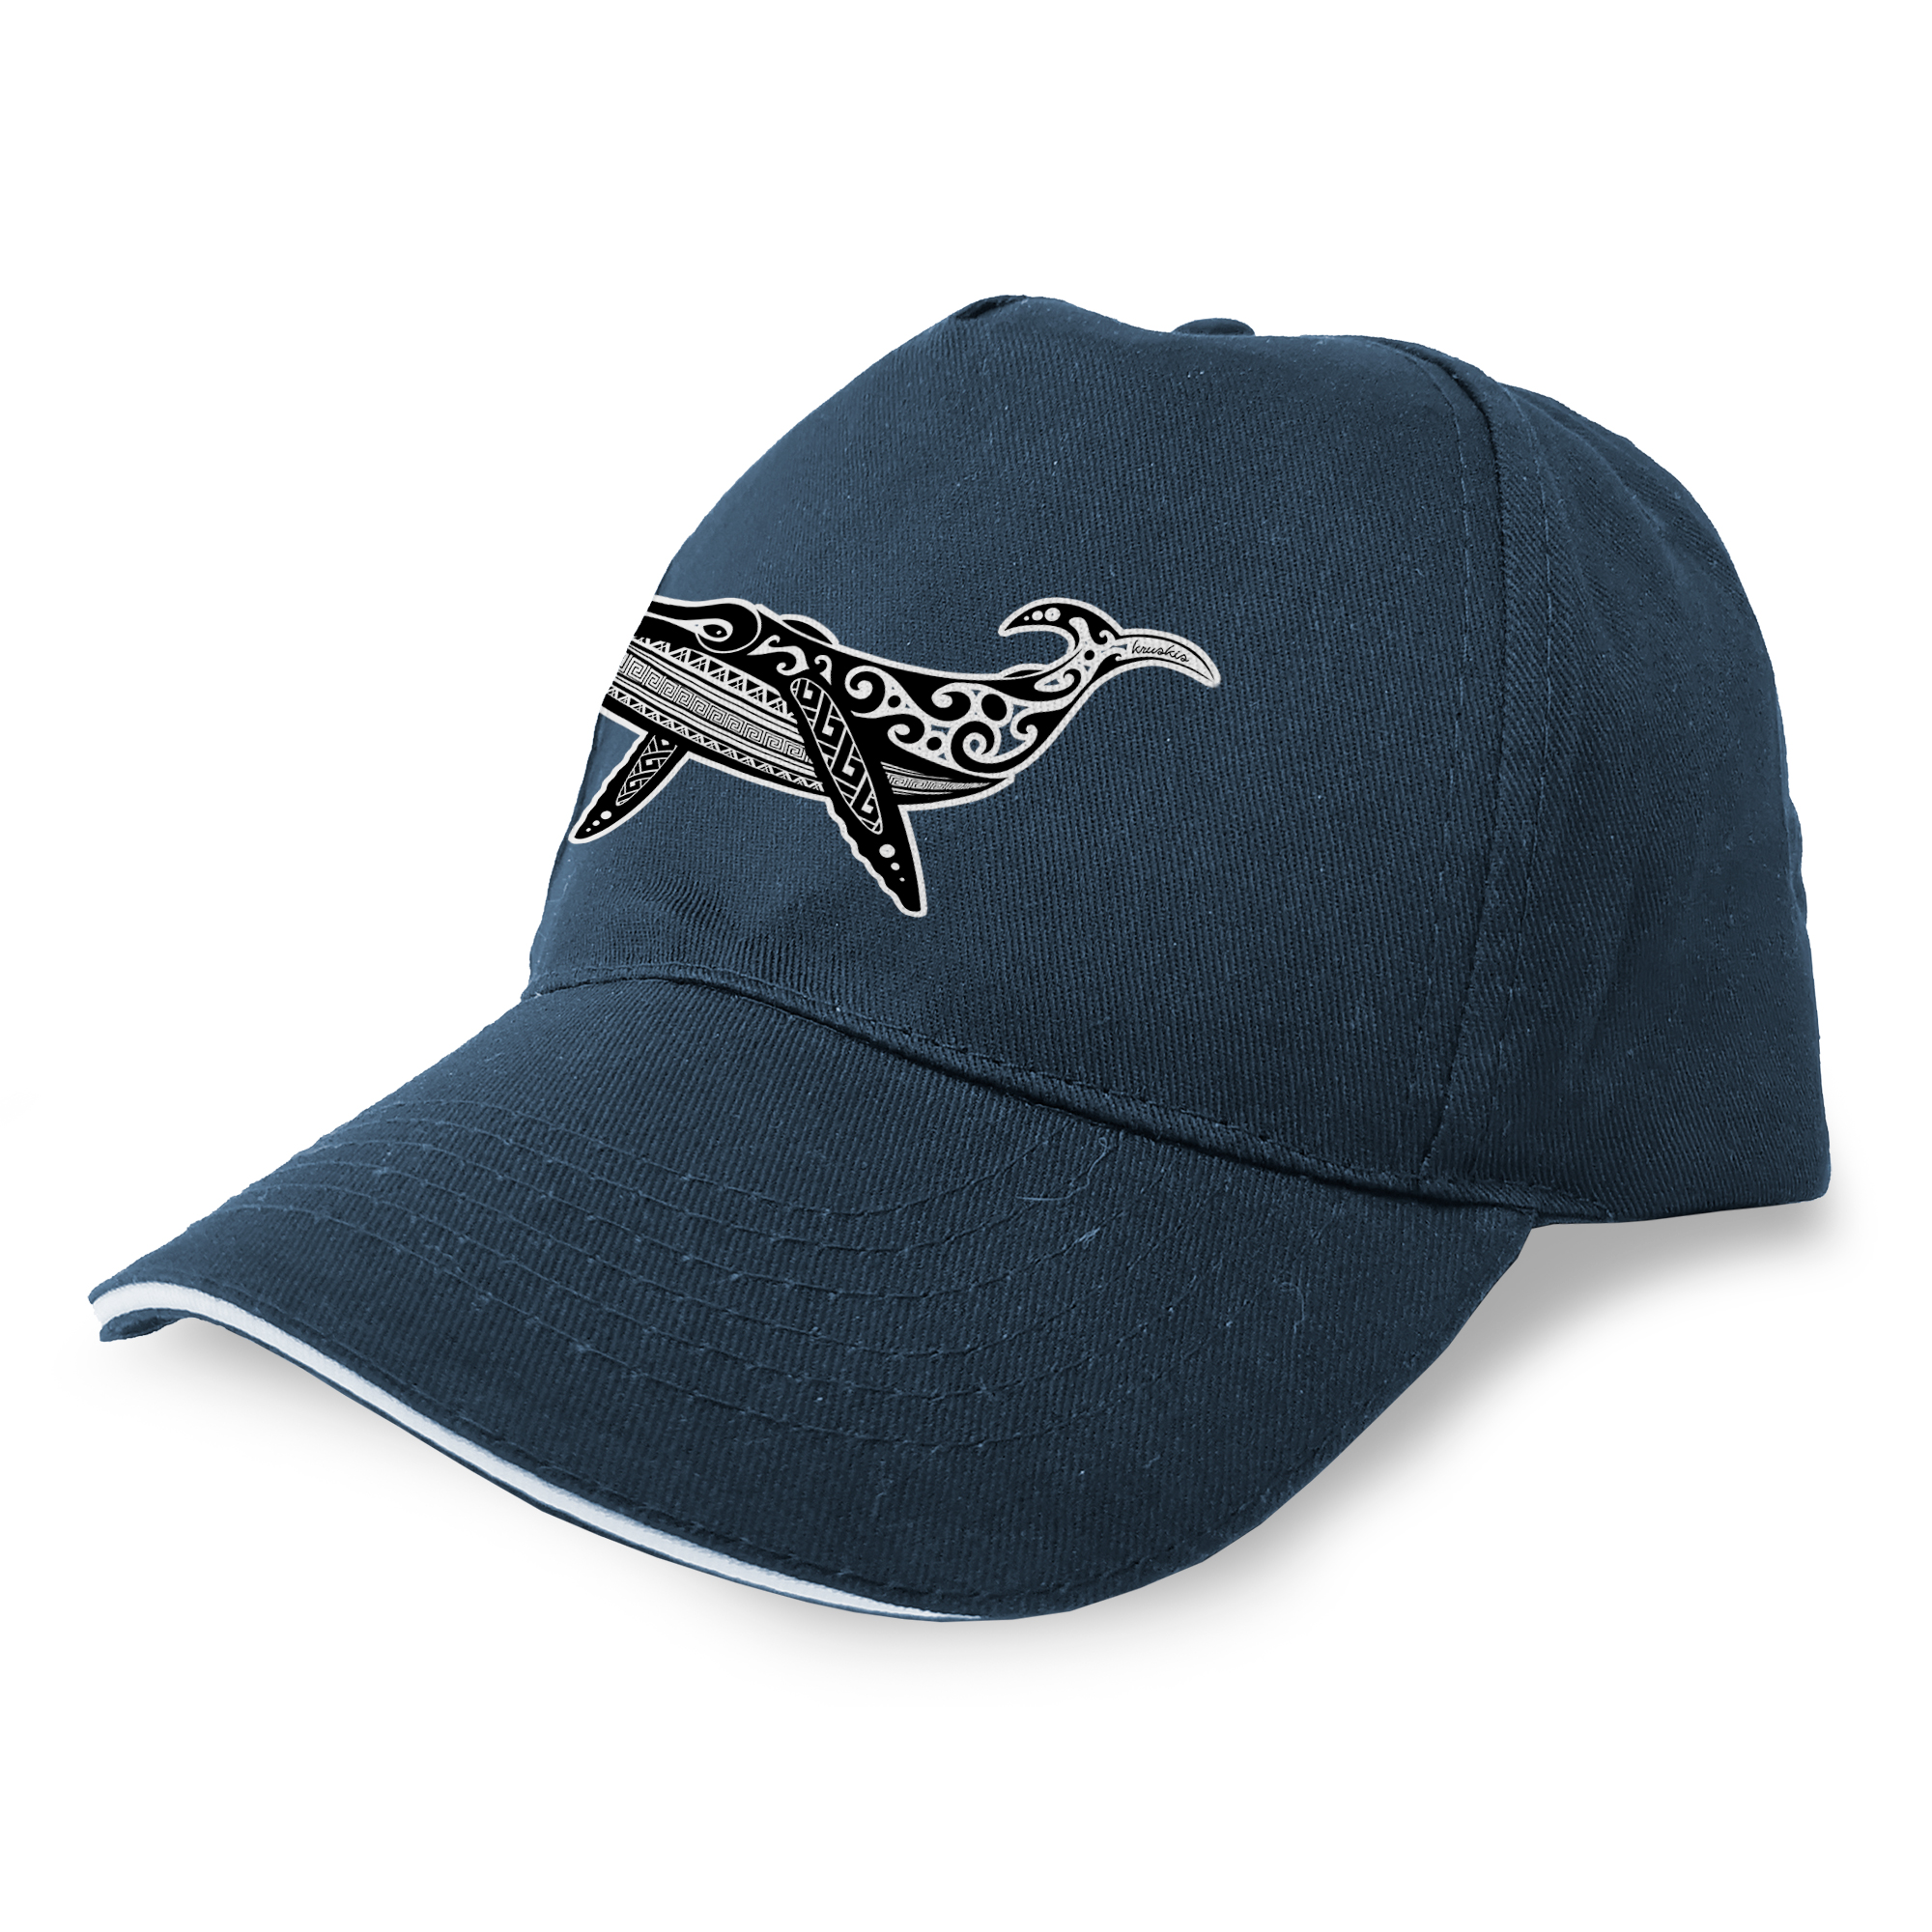 Cap Immersione Whale Tribal Unisex